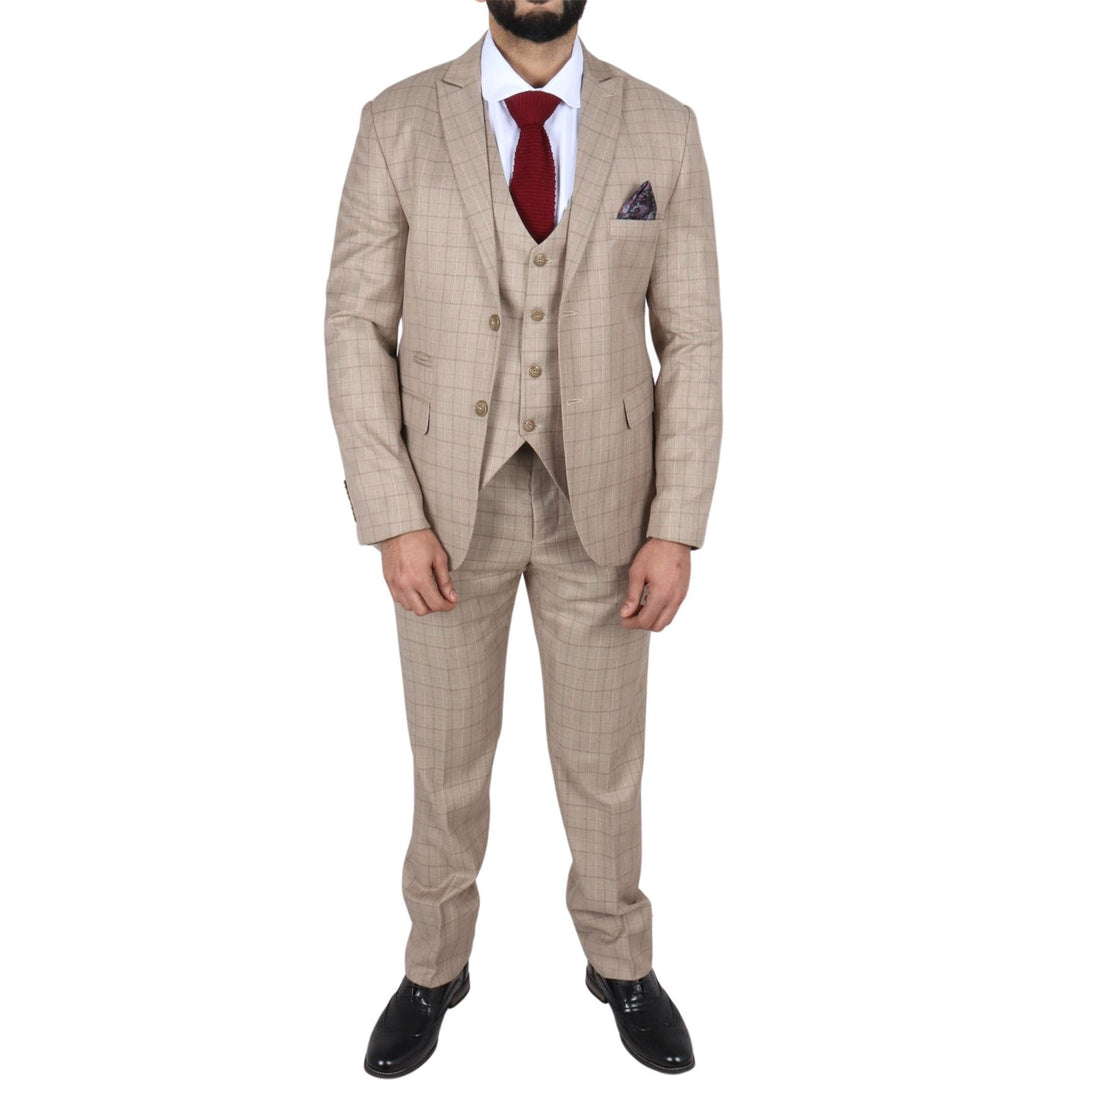 Men's Beige Suit Prince Of Wales Check Tailored Fit 3 Piece Formal Dress